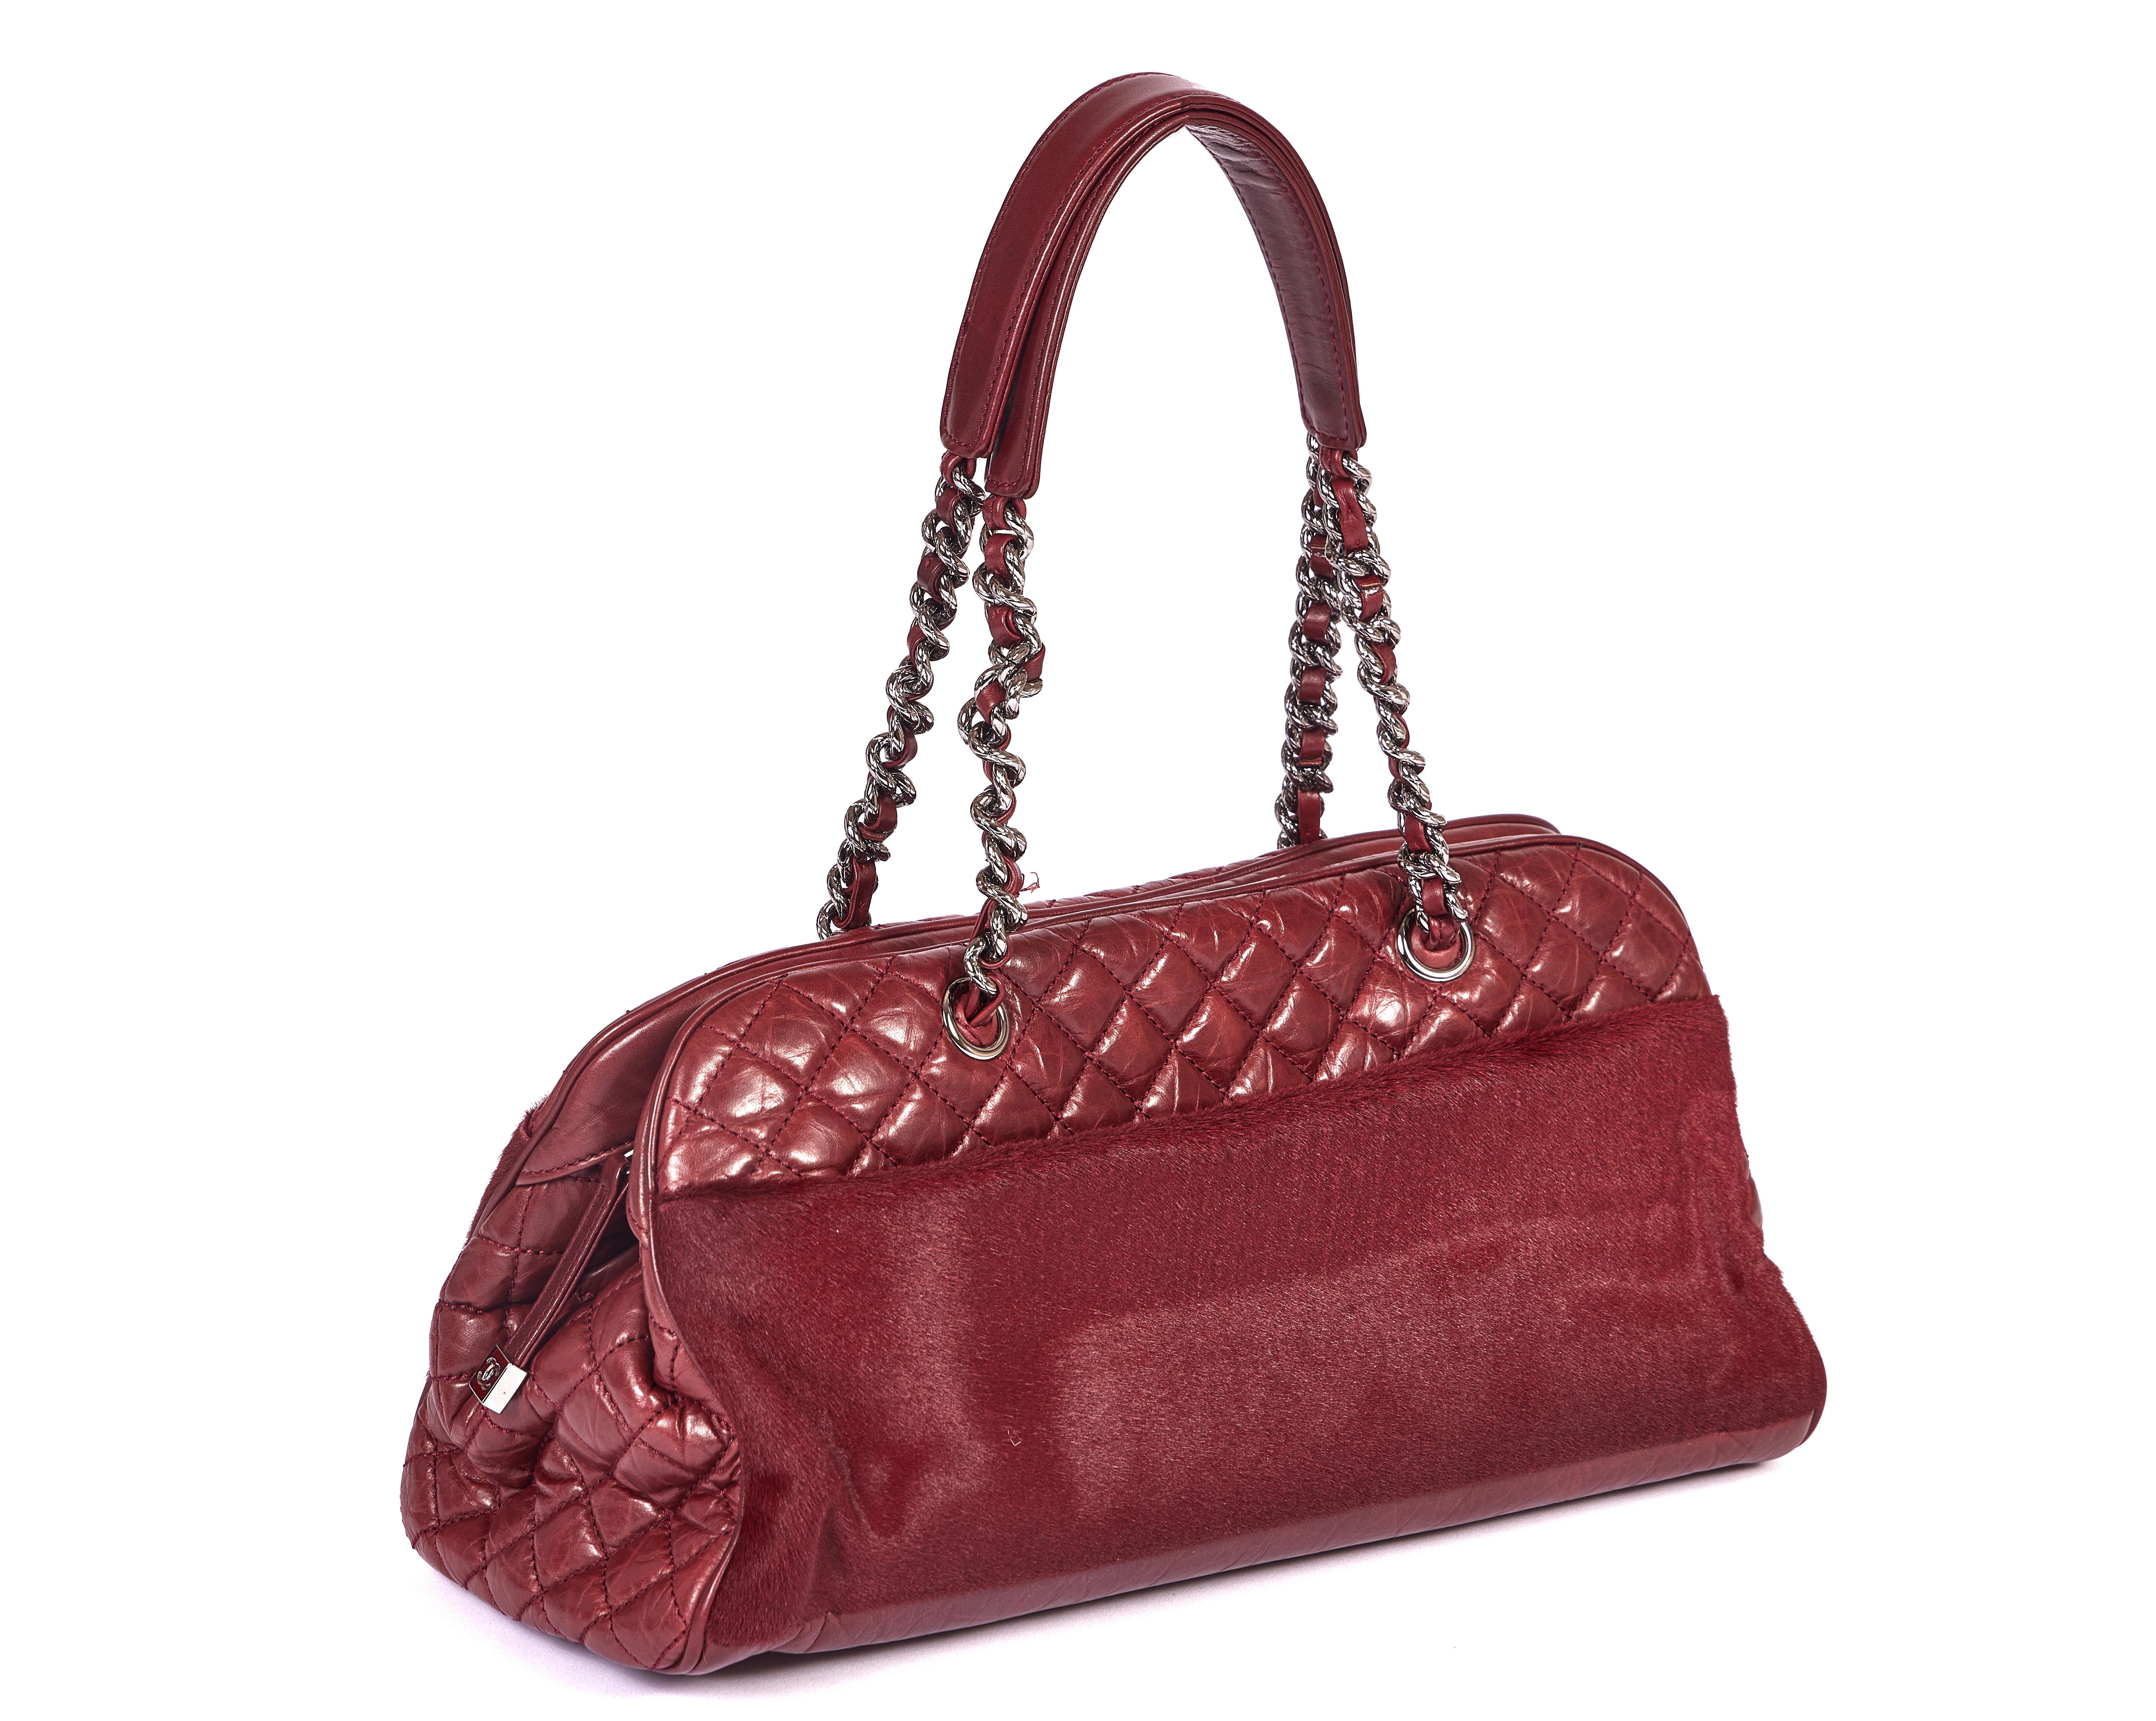 This burgundy Chanel bag from 2006 is made out of leather and finished with pony hair. The shoulder bag comes with the classic chains and the drop is 8 inch. It has the original hologram and comes with a Chanel dust bag.
